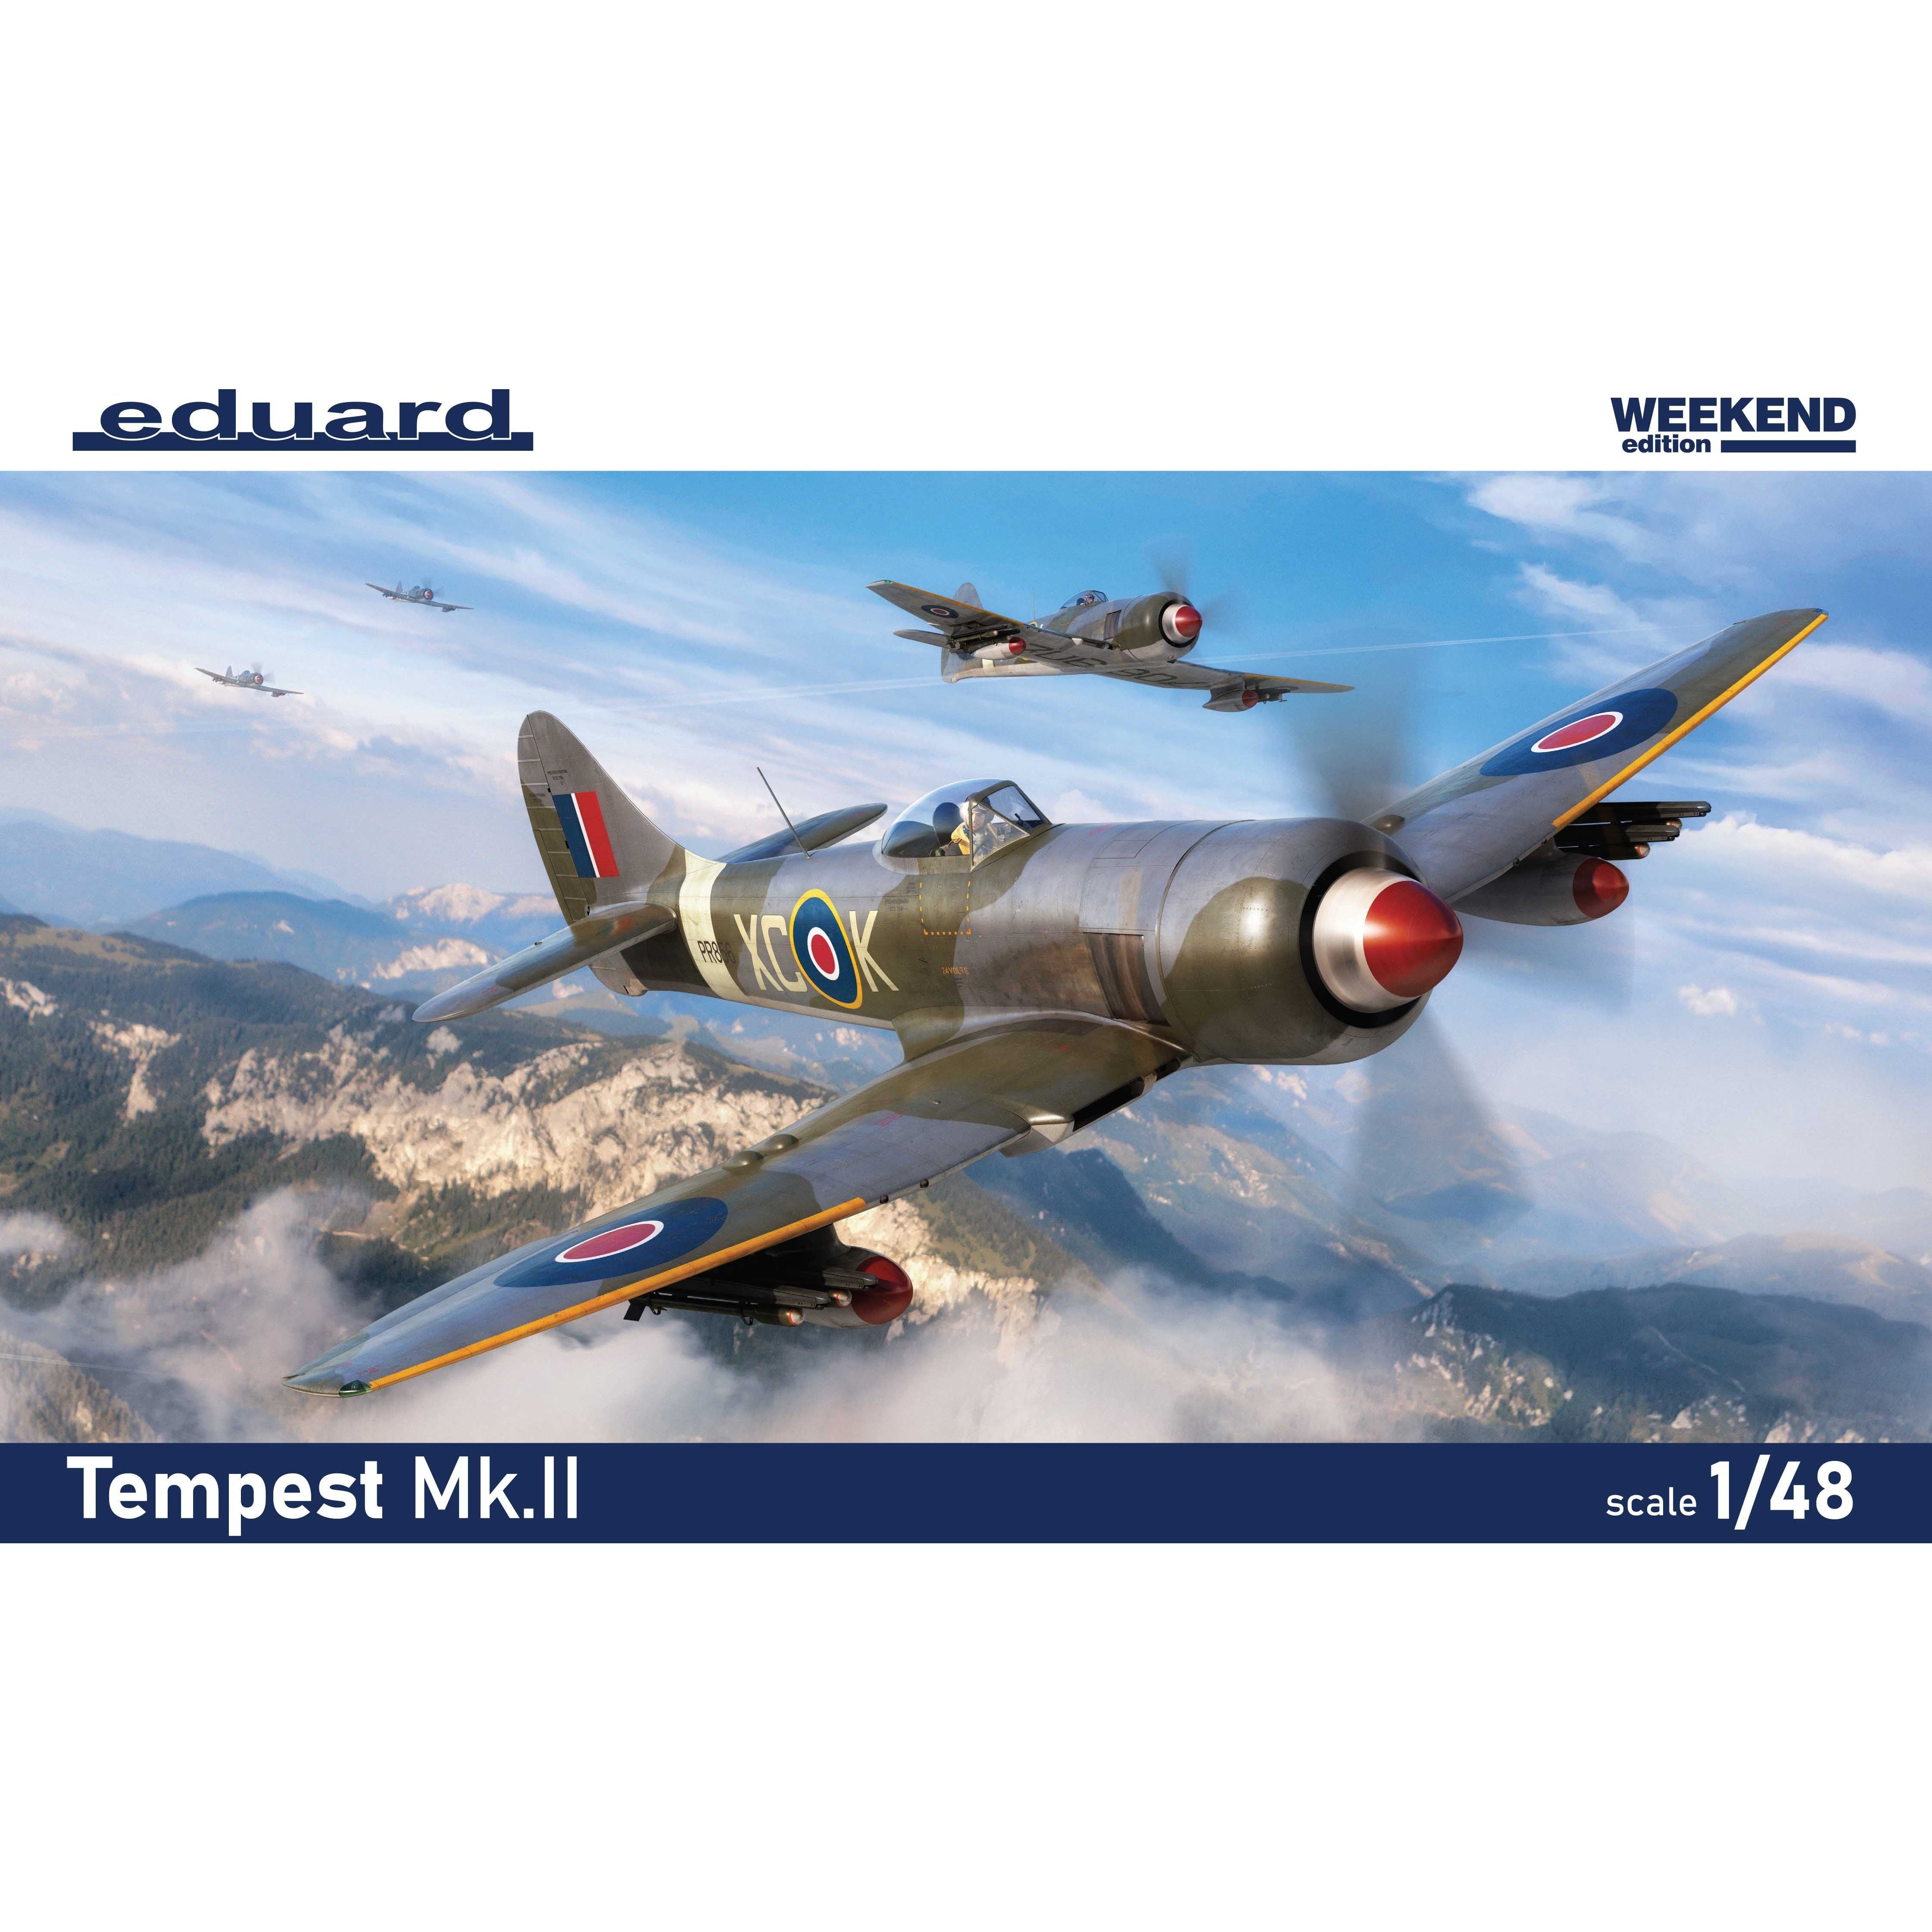 Tempest Mk.II [Weekend Edition] 1/48 #84190 by Eduard